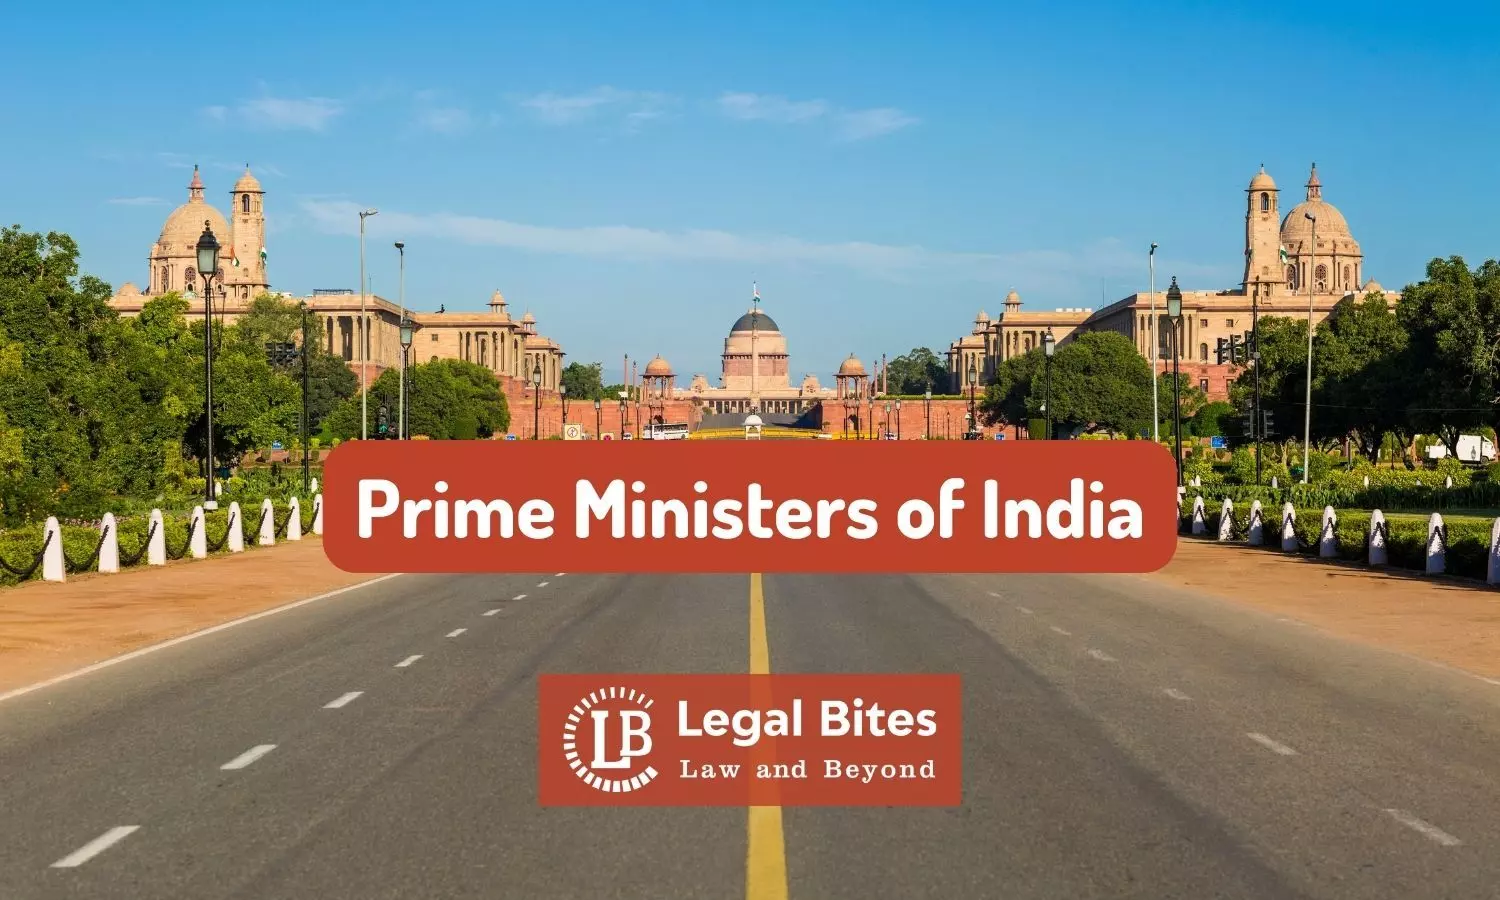 Prime Ministers of India - All You Need to Know